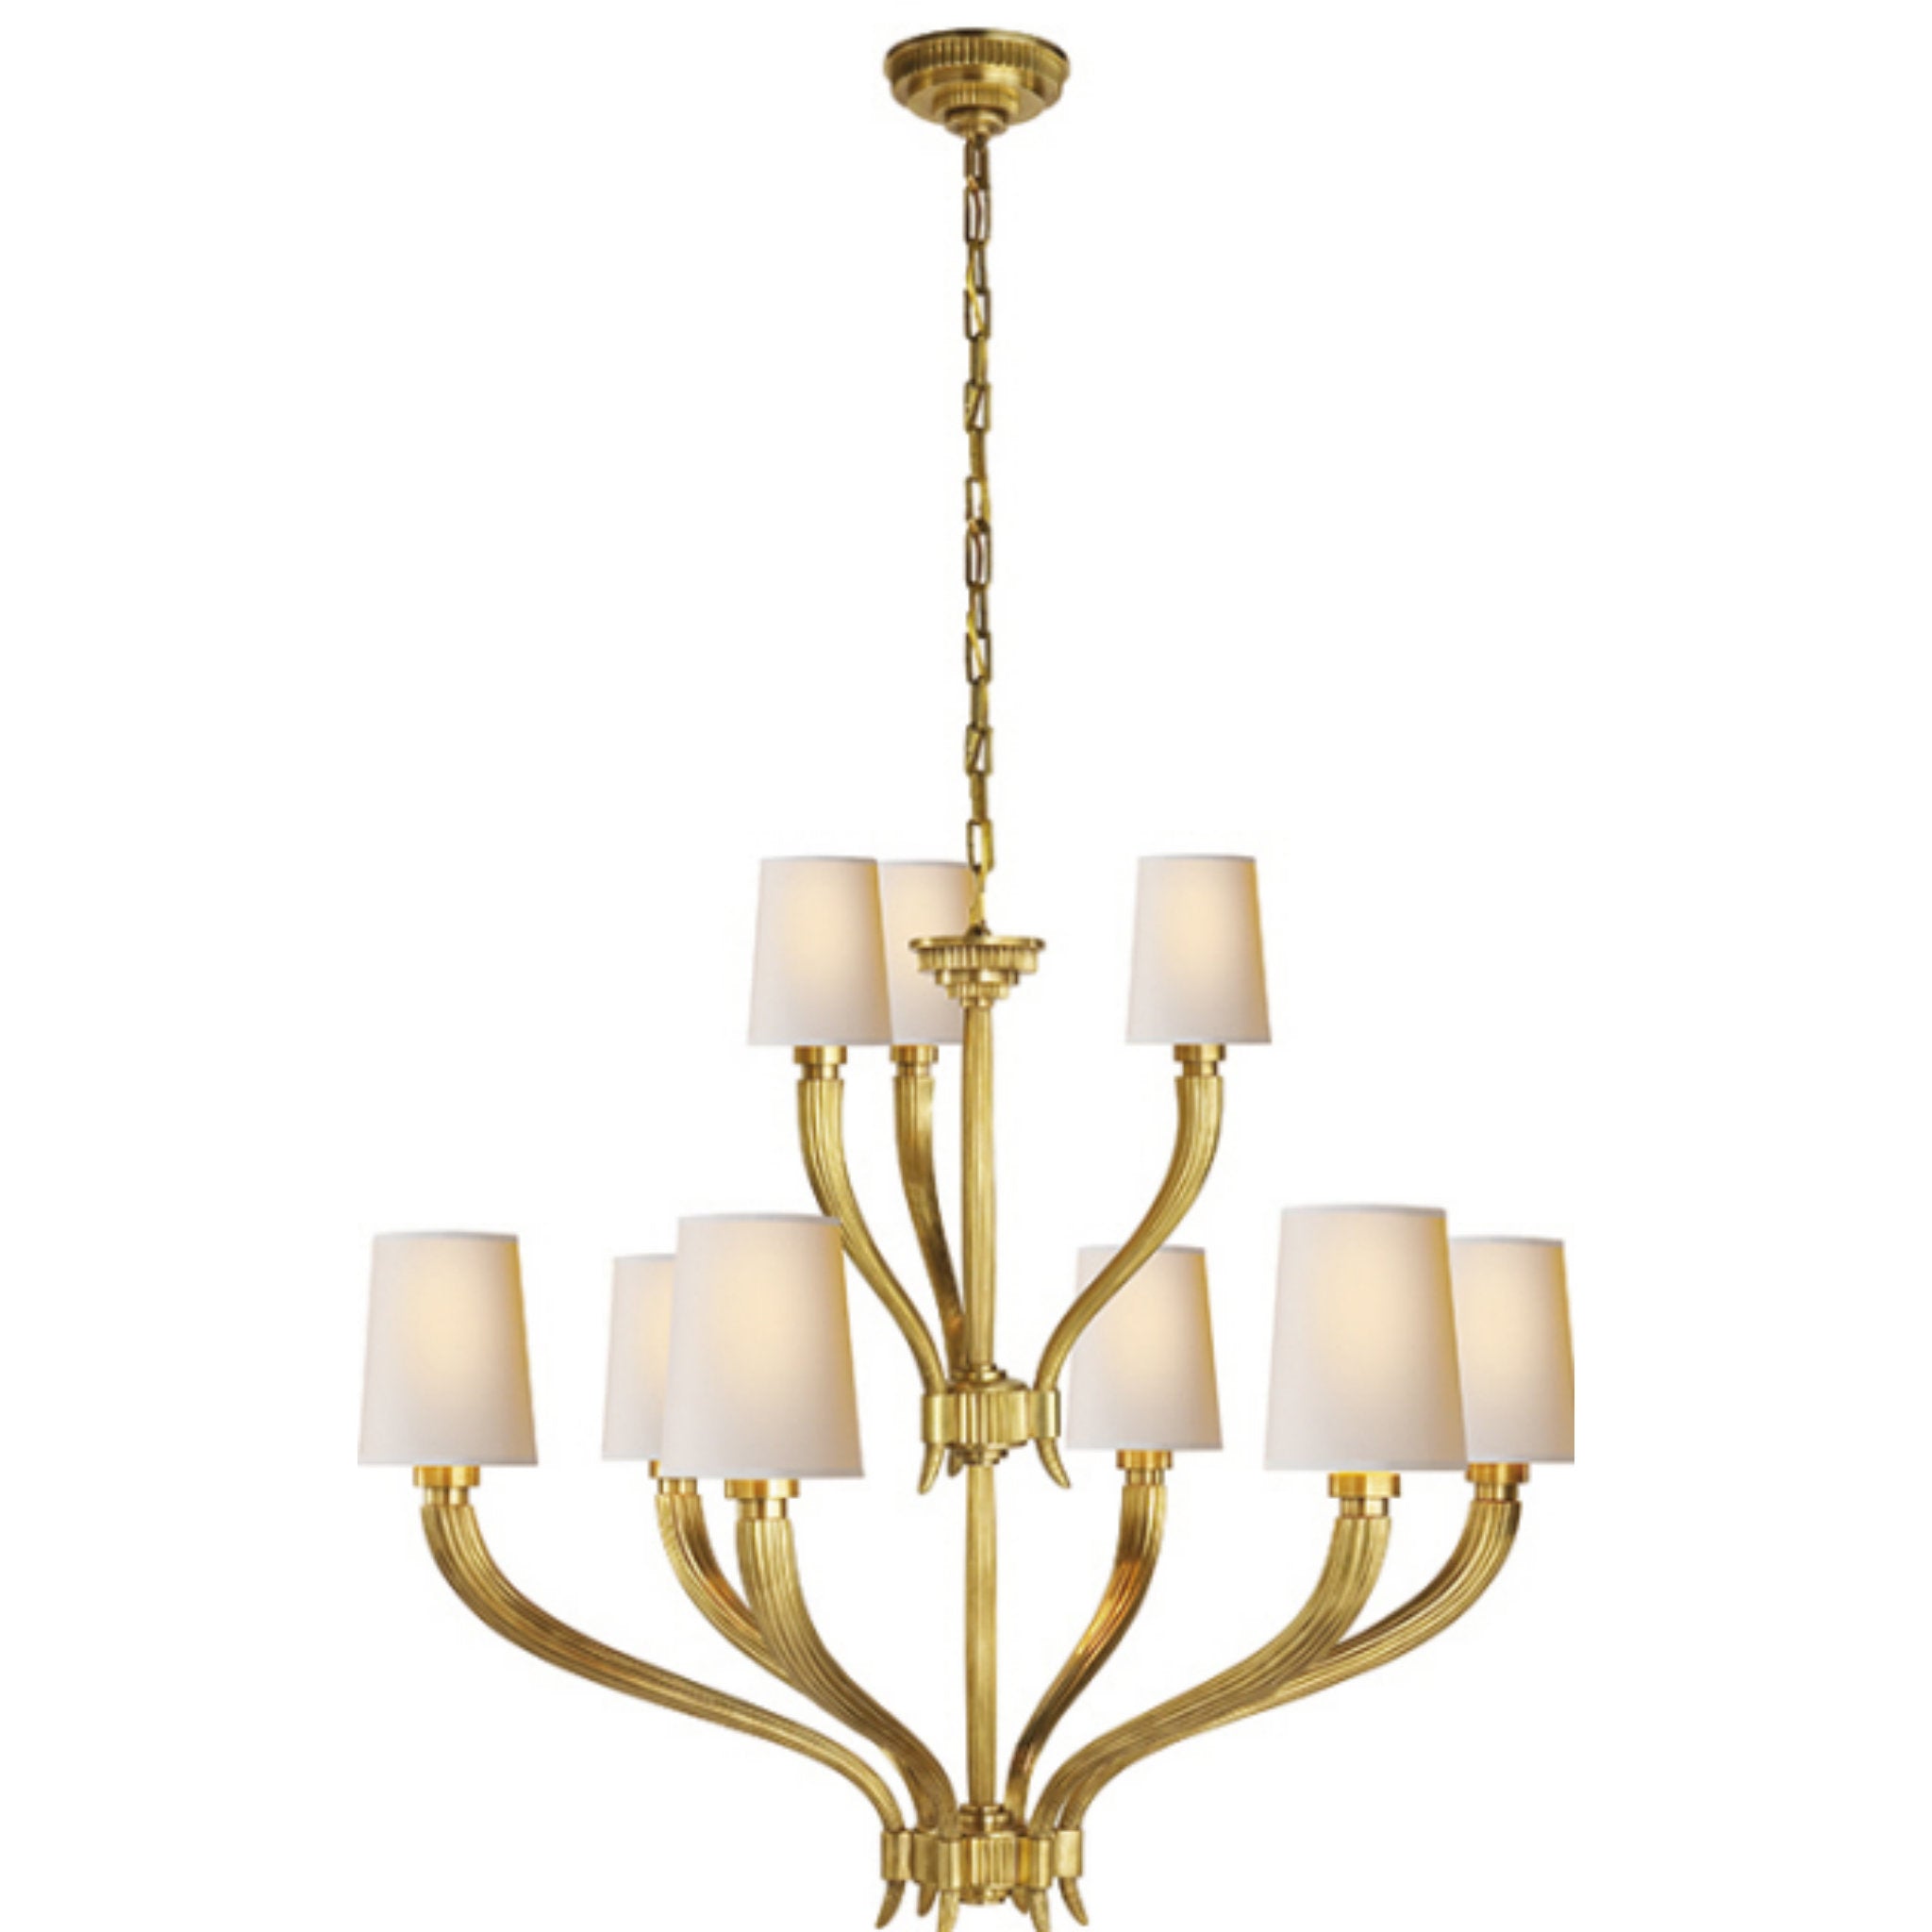 Chapman & Myers Ruhlmann 2-Tier Chandelier in Antique-Burnished Brass with Natural Paper Shades